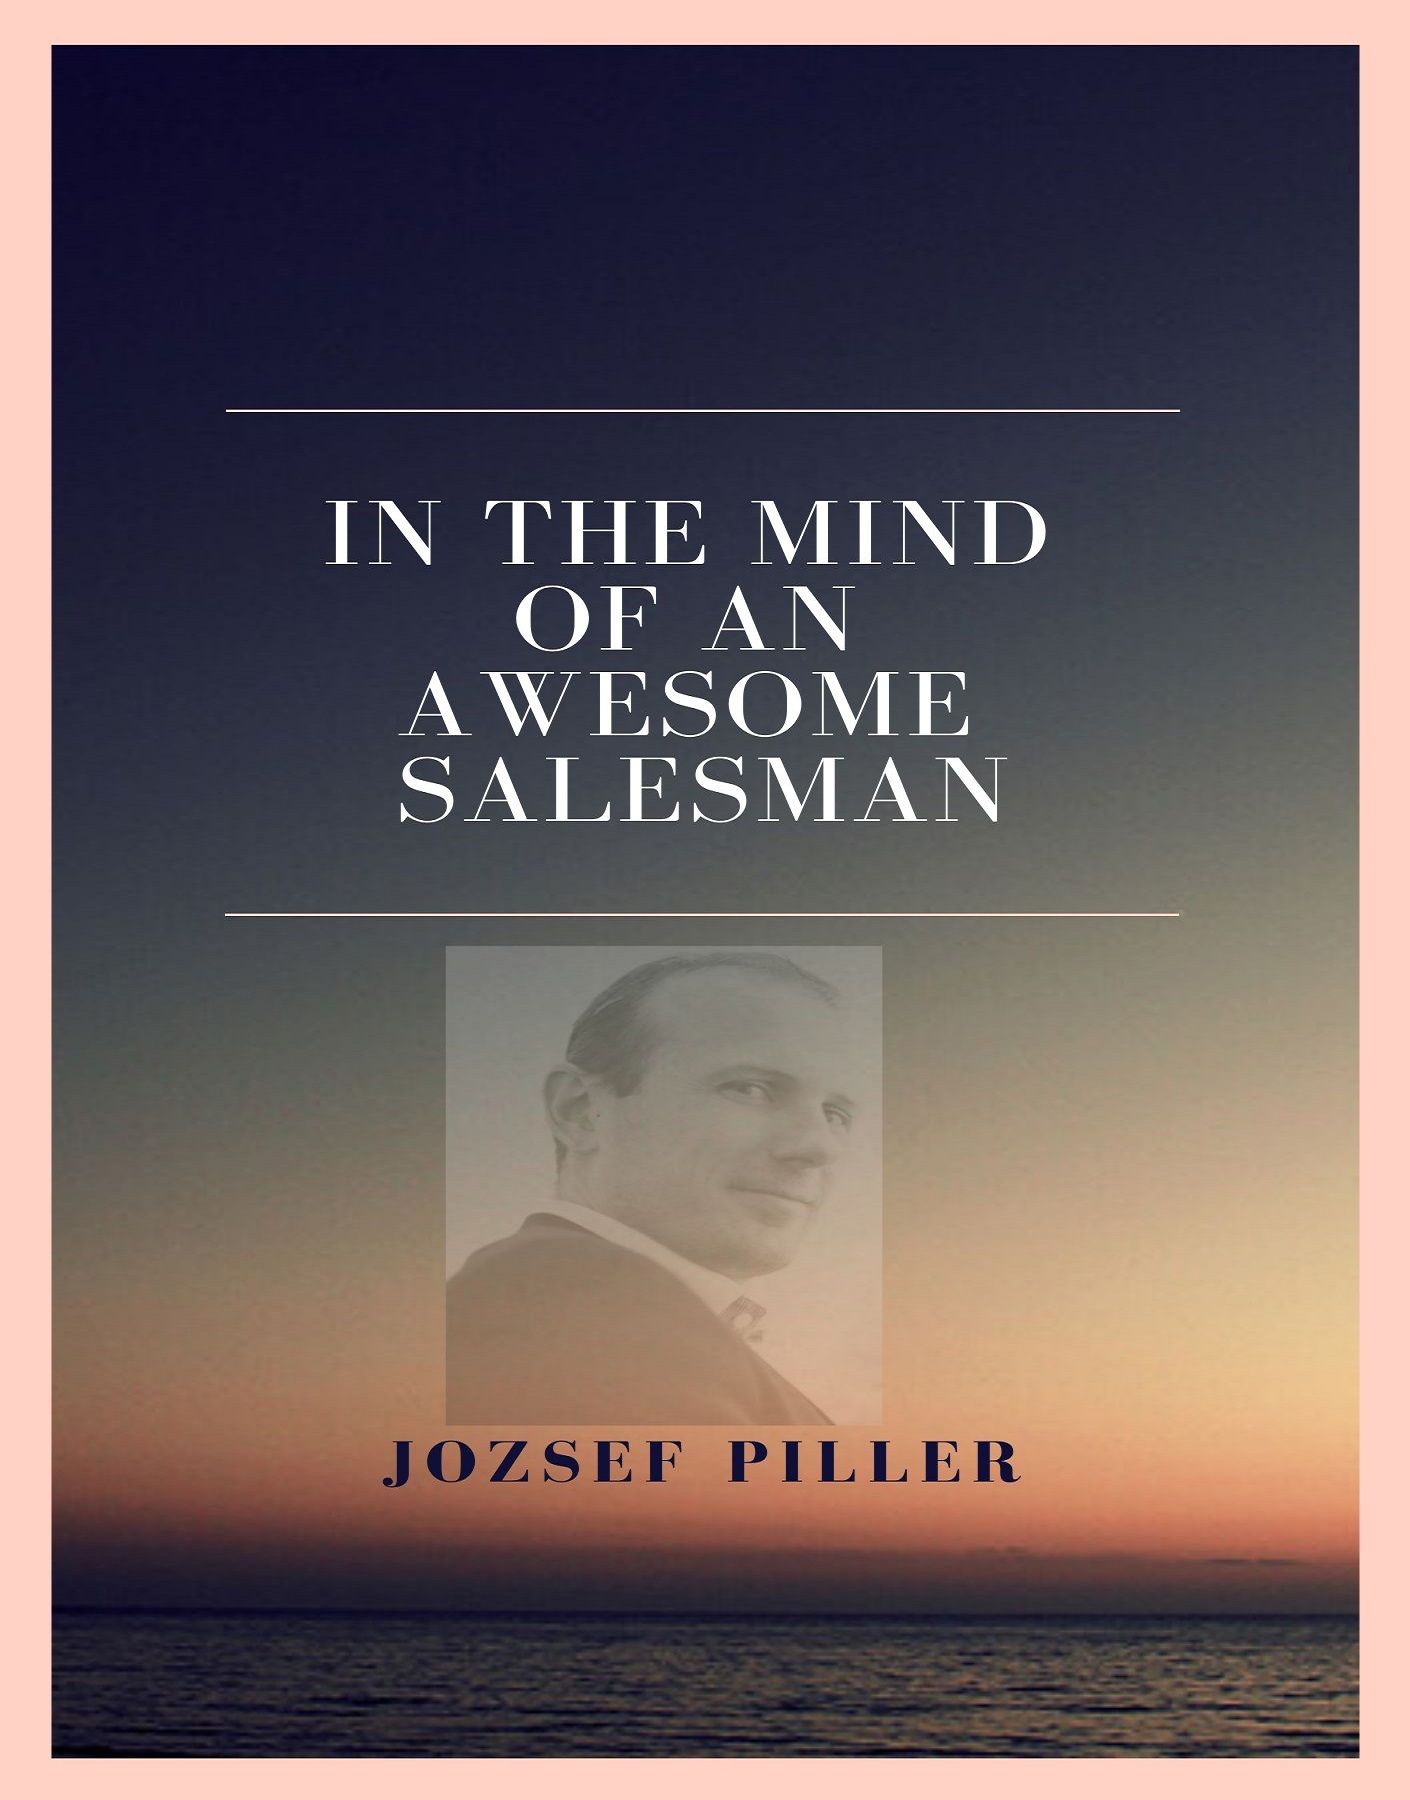 In the mind of an awesome salesman, audiobook by Jozsef Piller